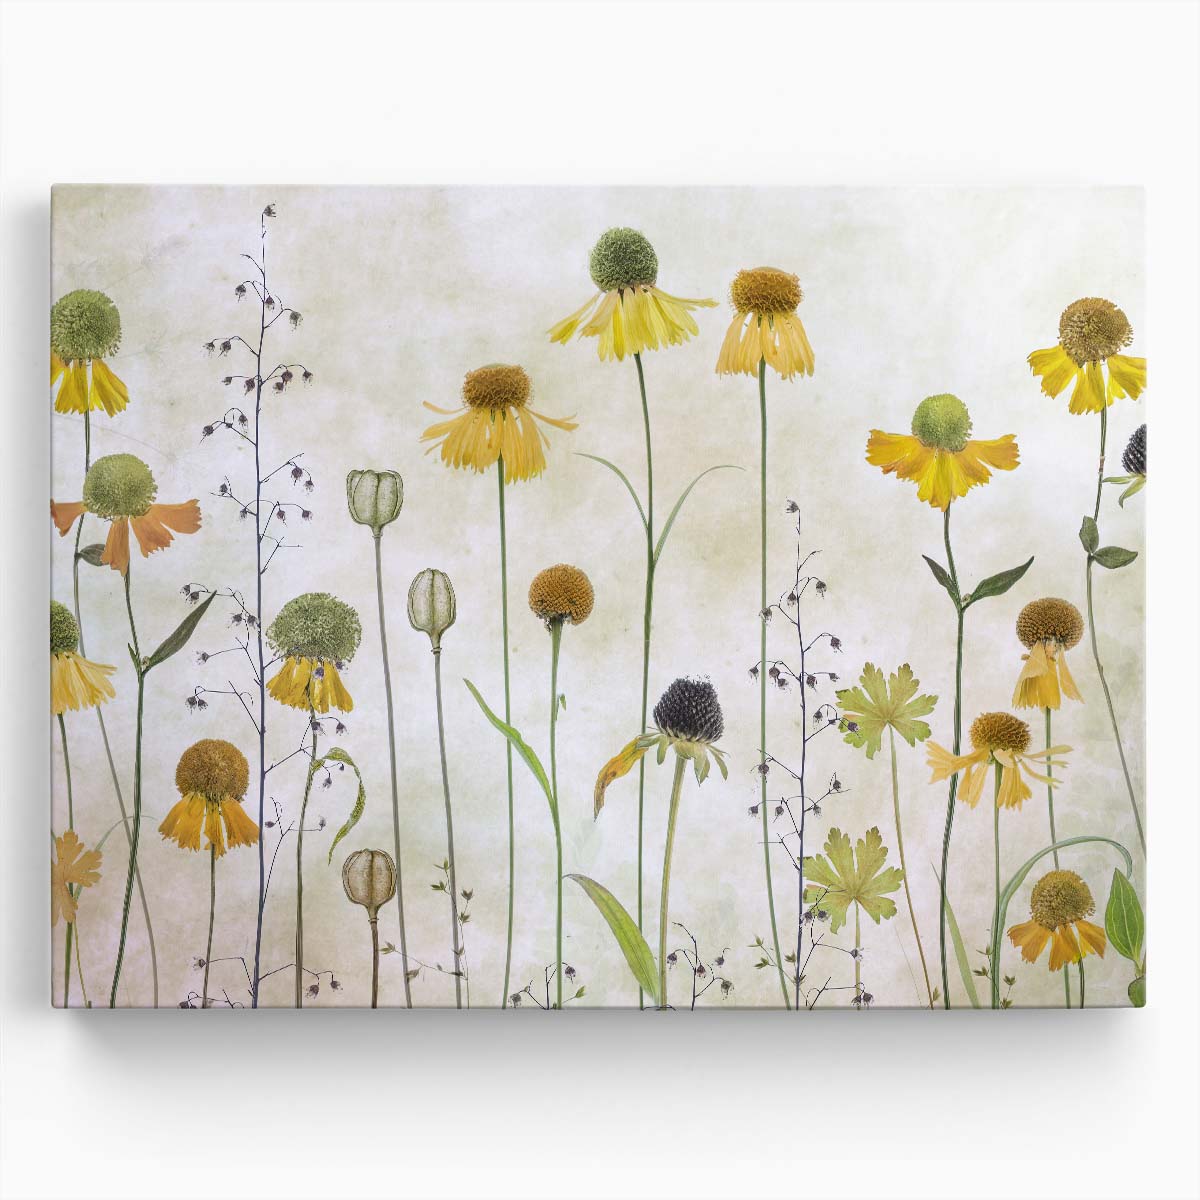 Helenium Summer Flowers Textured Botanical Photography by Mandy Disher Wall Art by Luxuriance Designs. Made in USA.